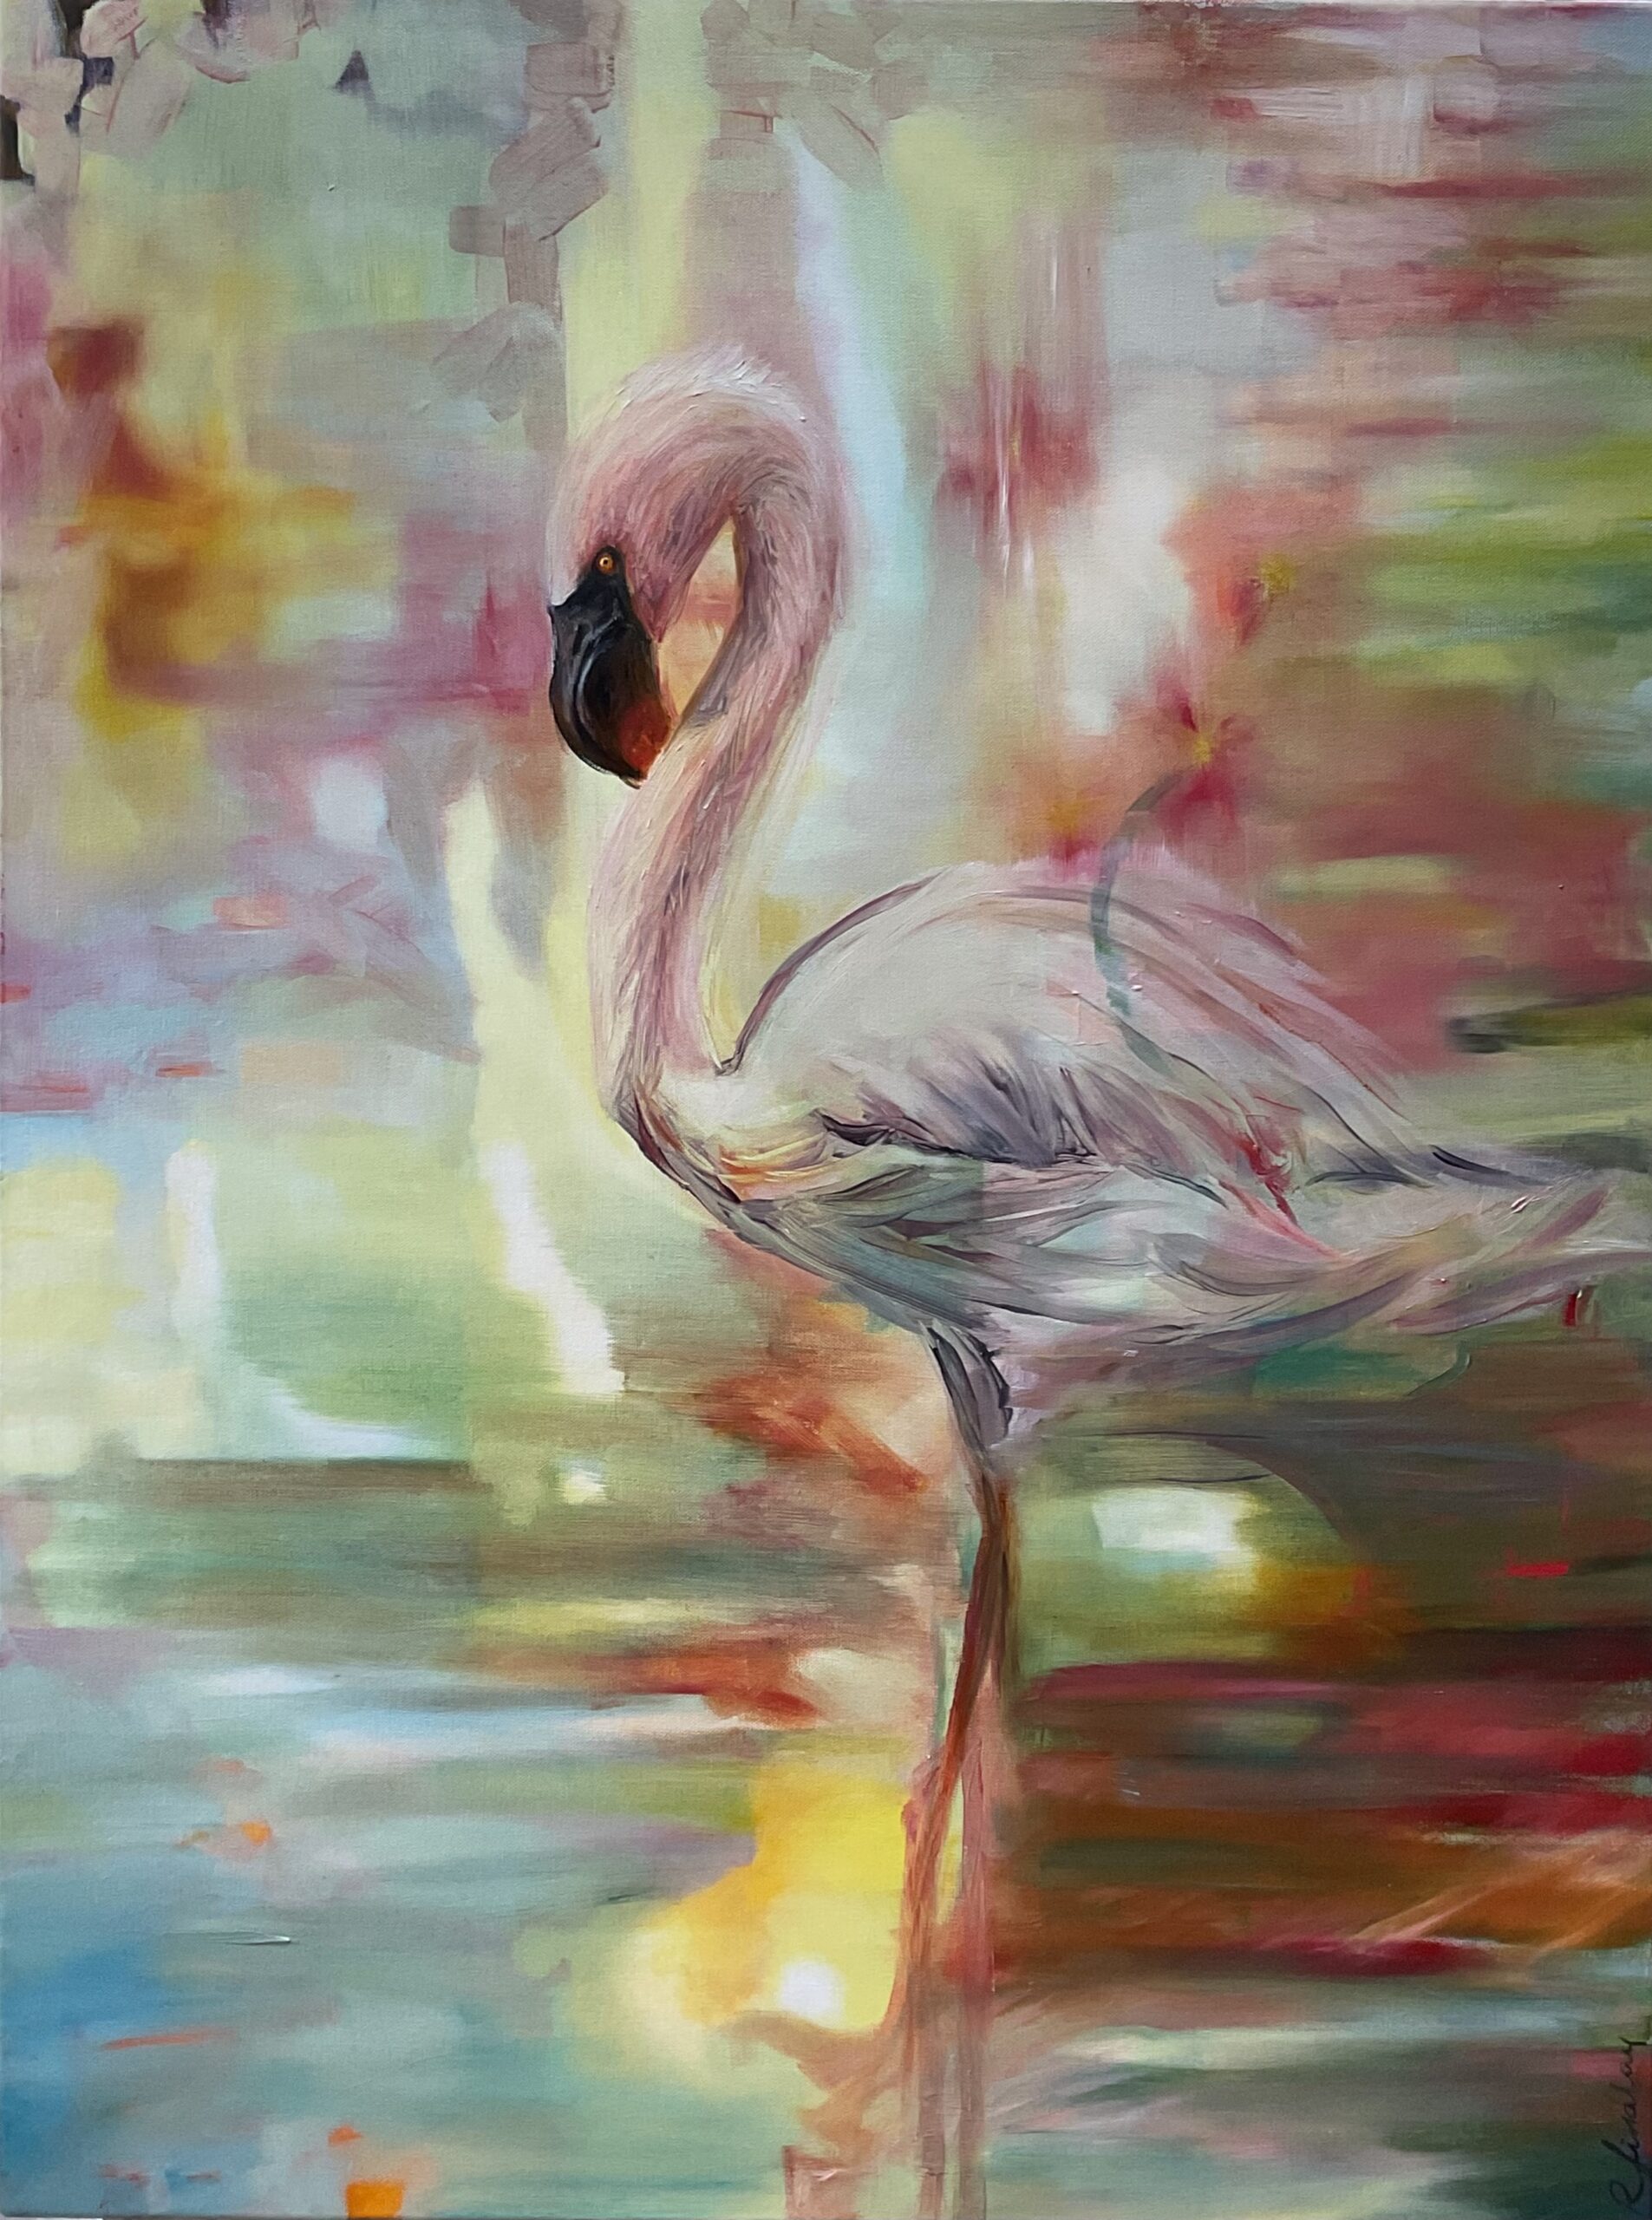 This is an oil and acrylic painting of a flamingo on an abstract background.